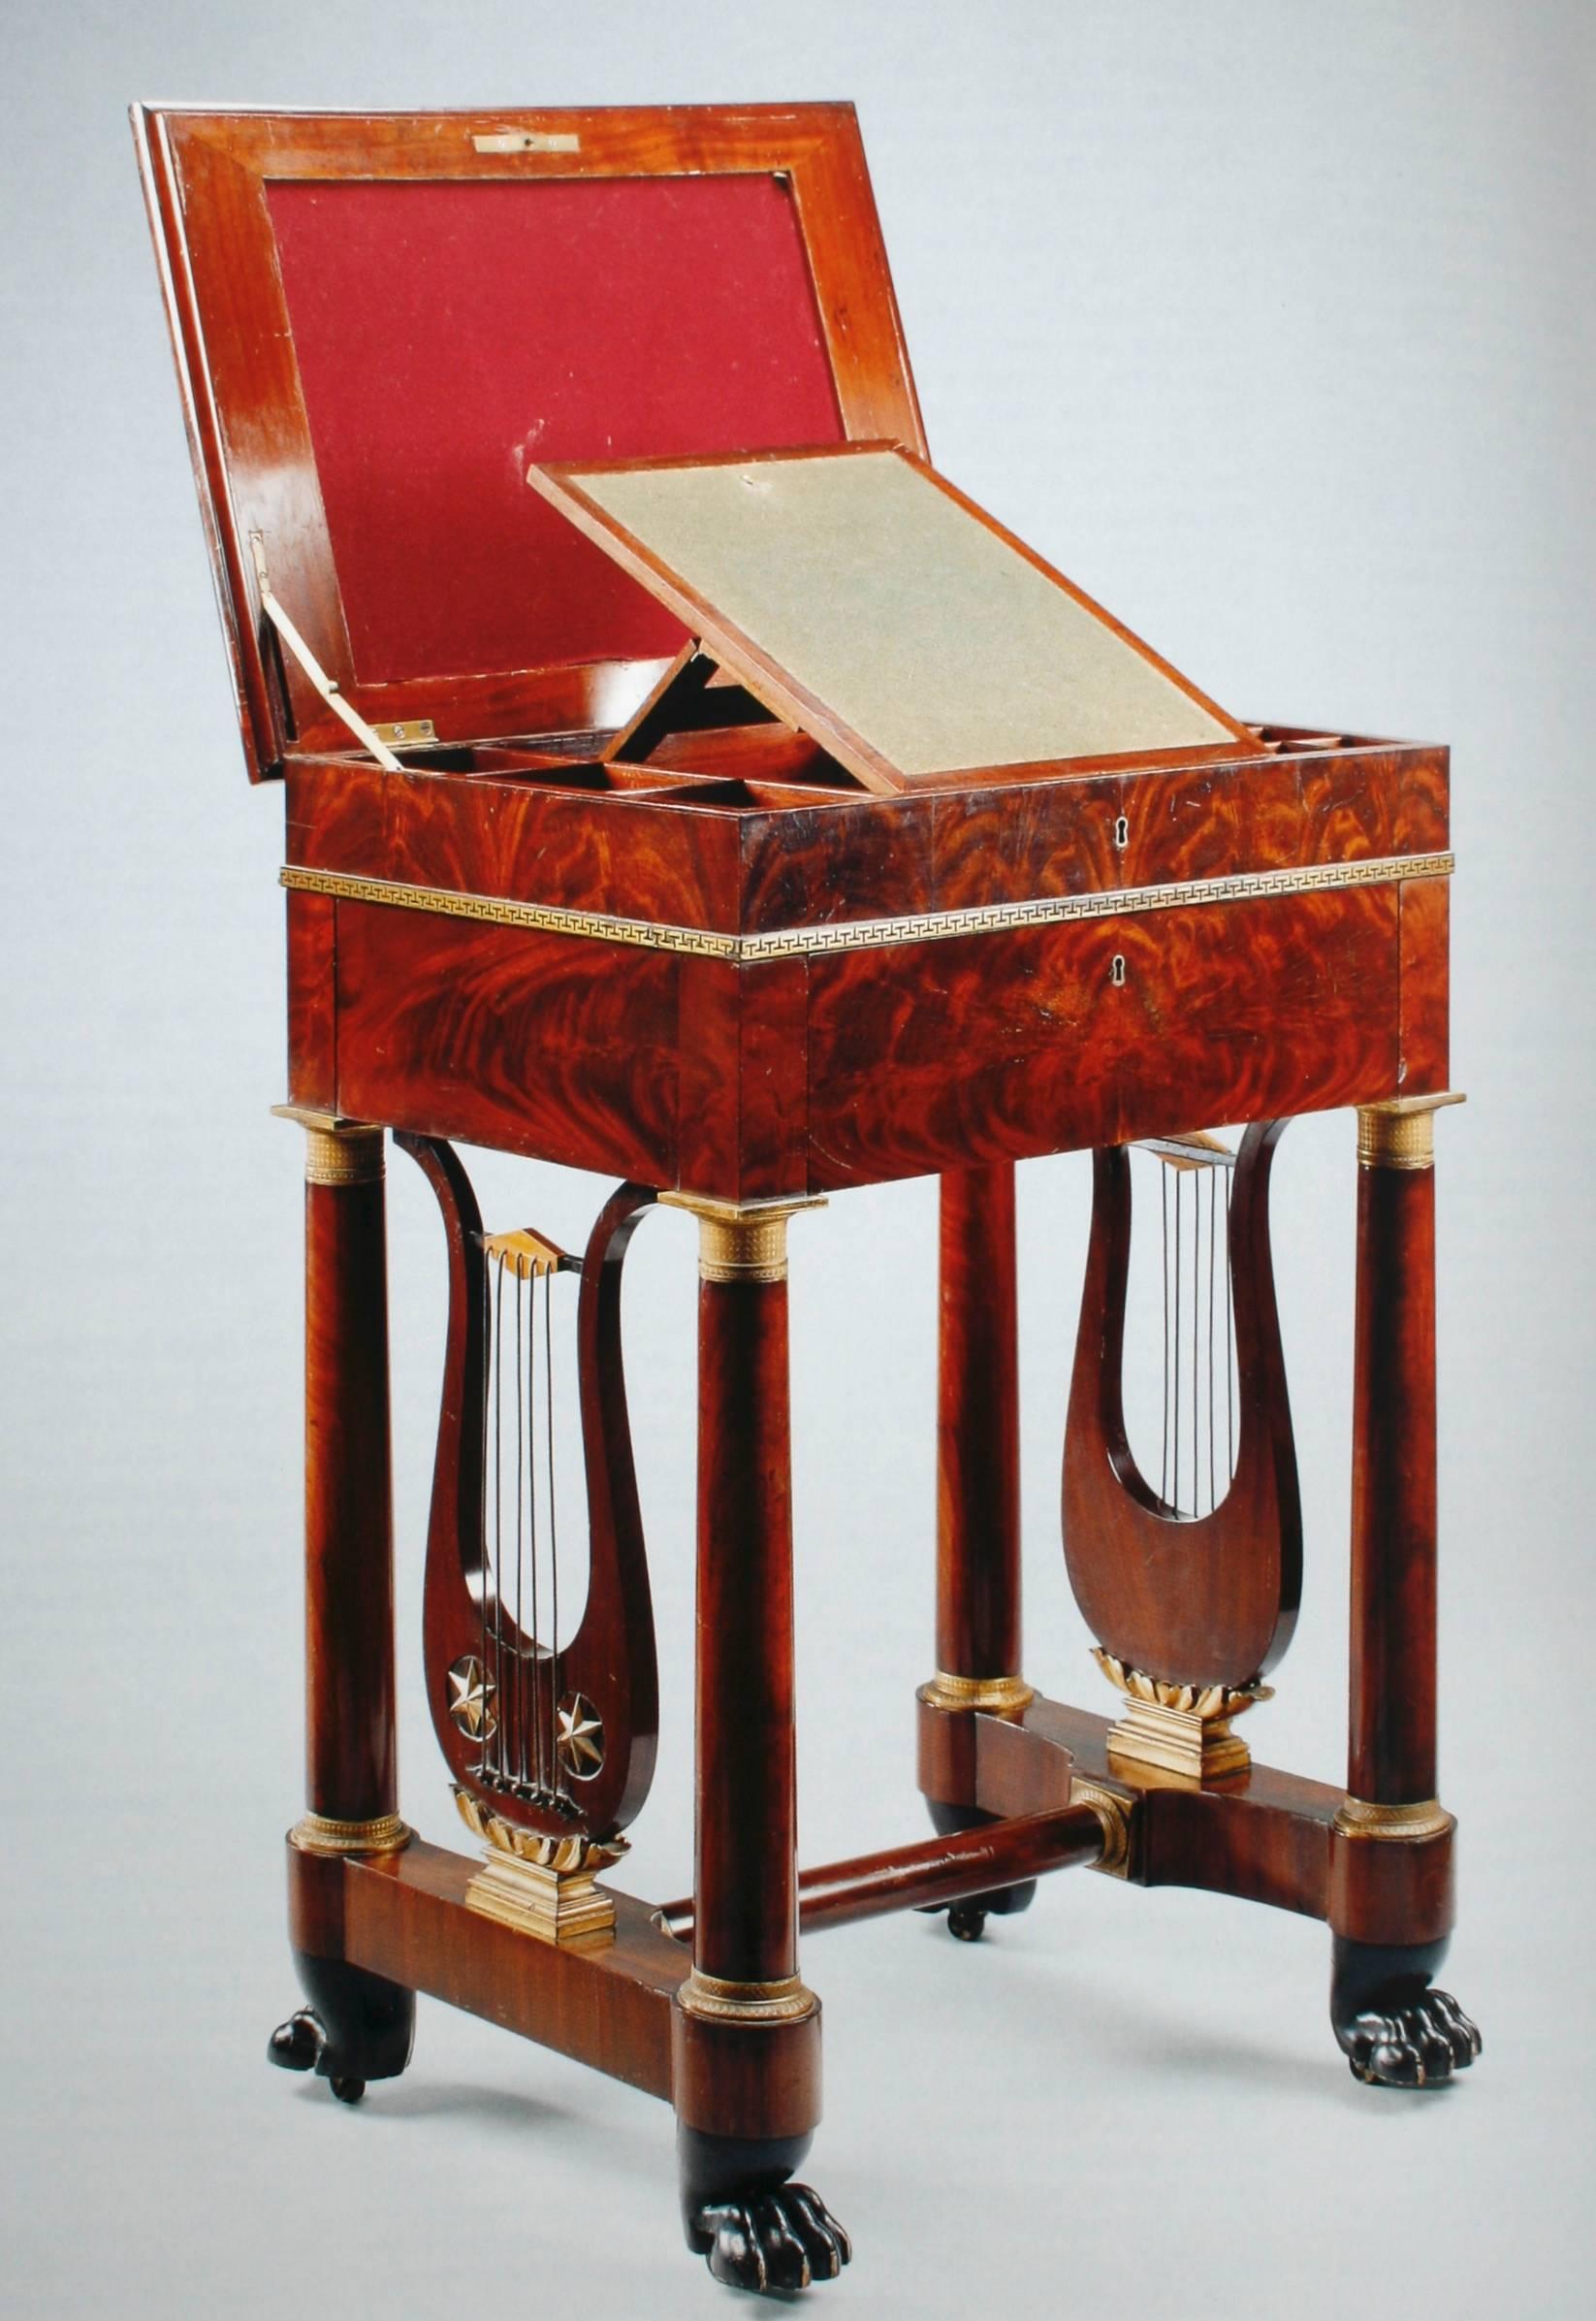 Honoré Lannuier Cabinetmaker from Paris: The Life and Work of a French Ébéniste For Sale 3